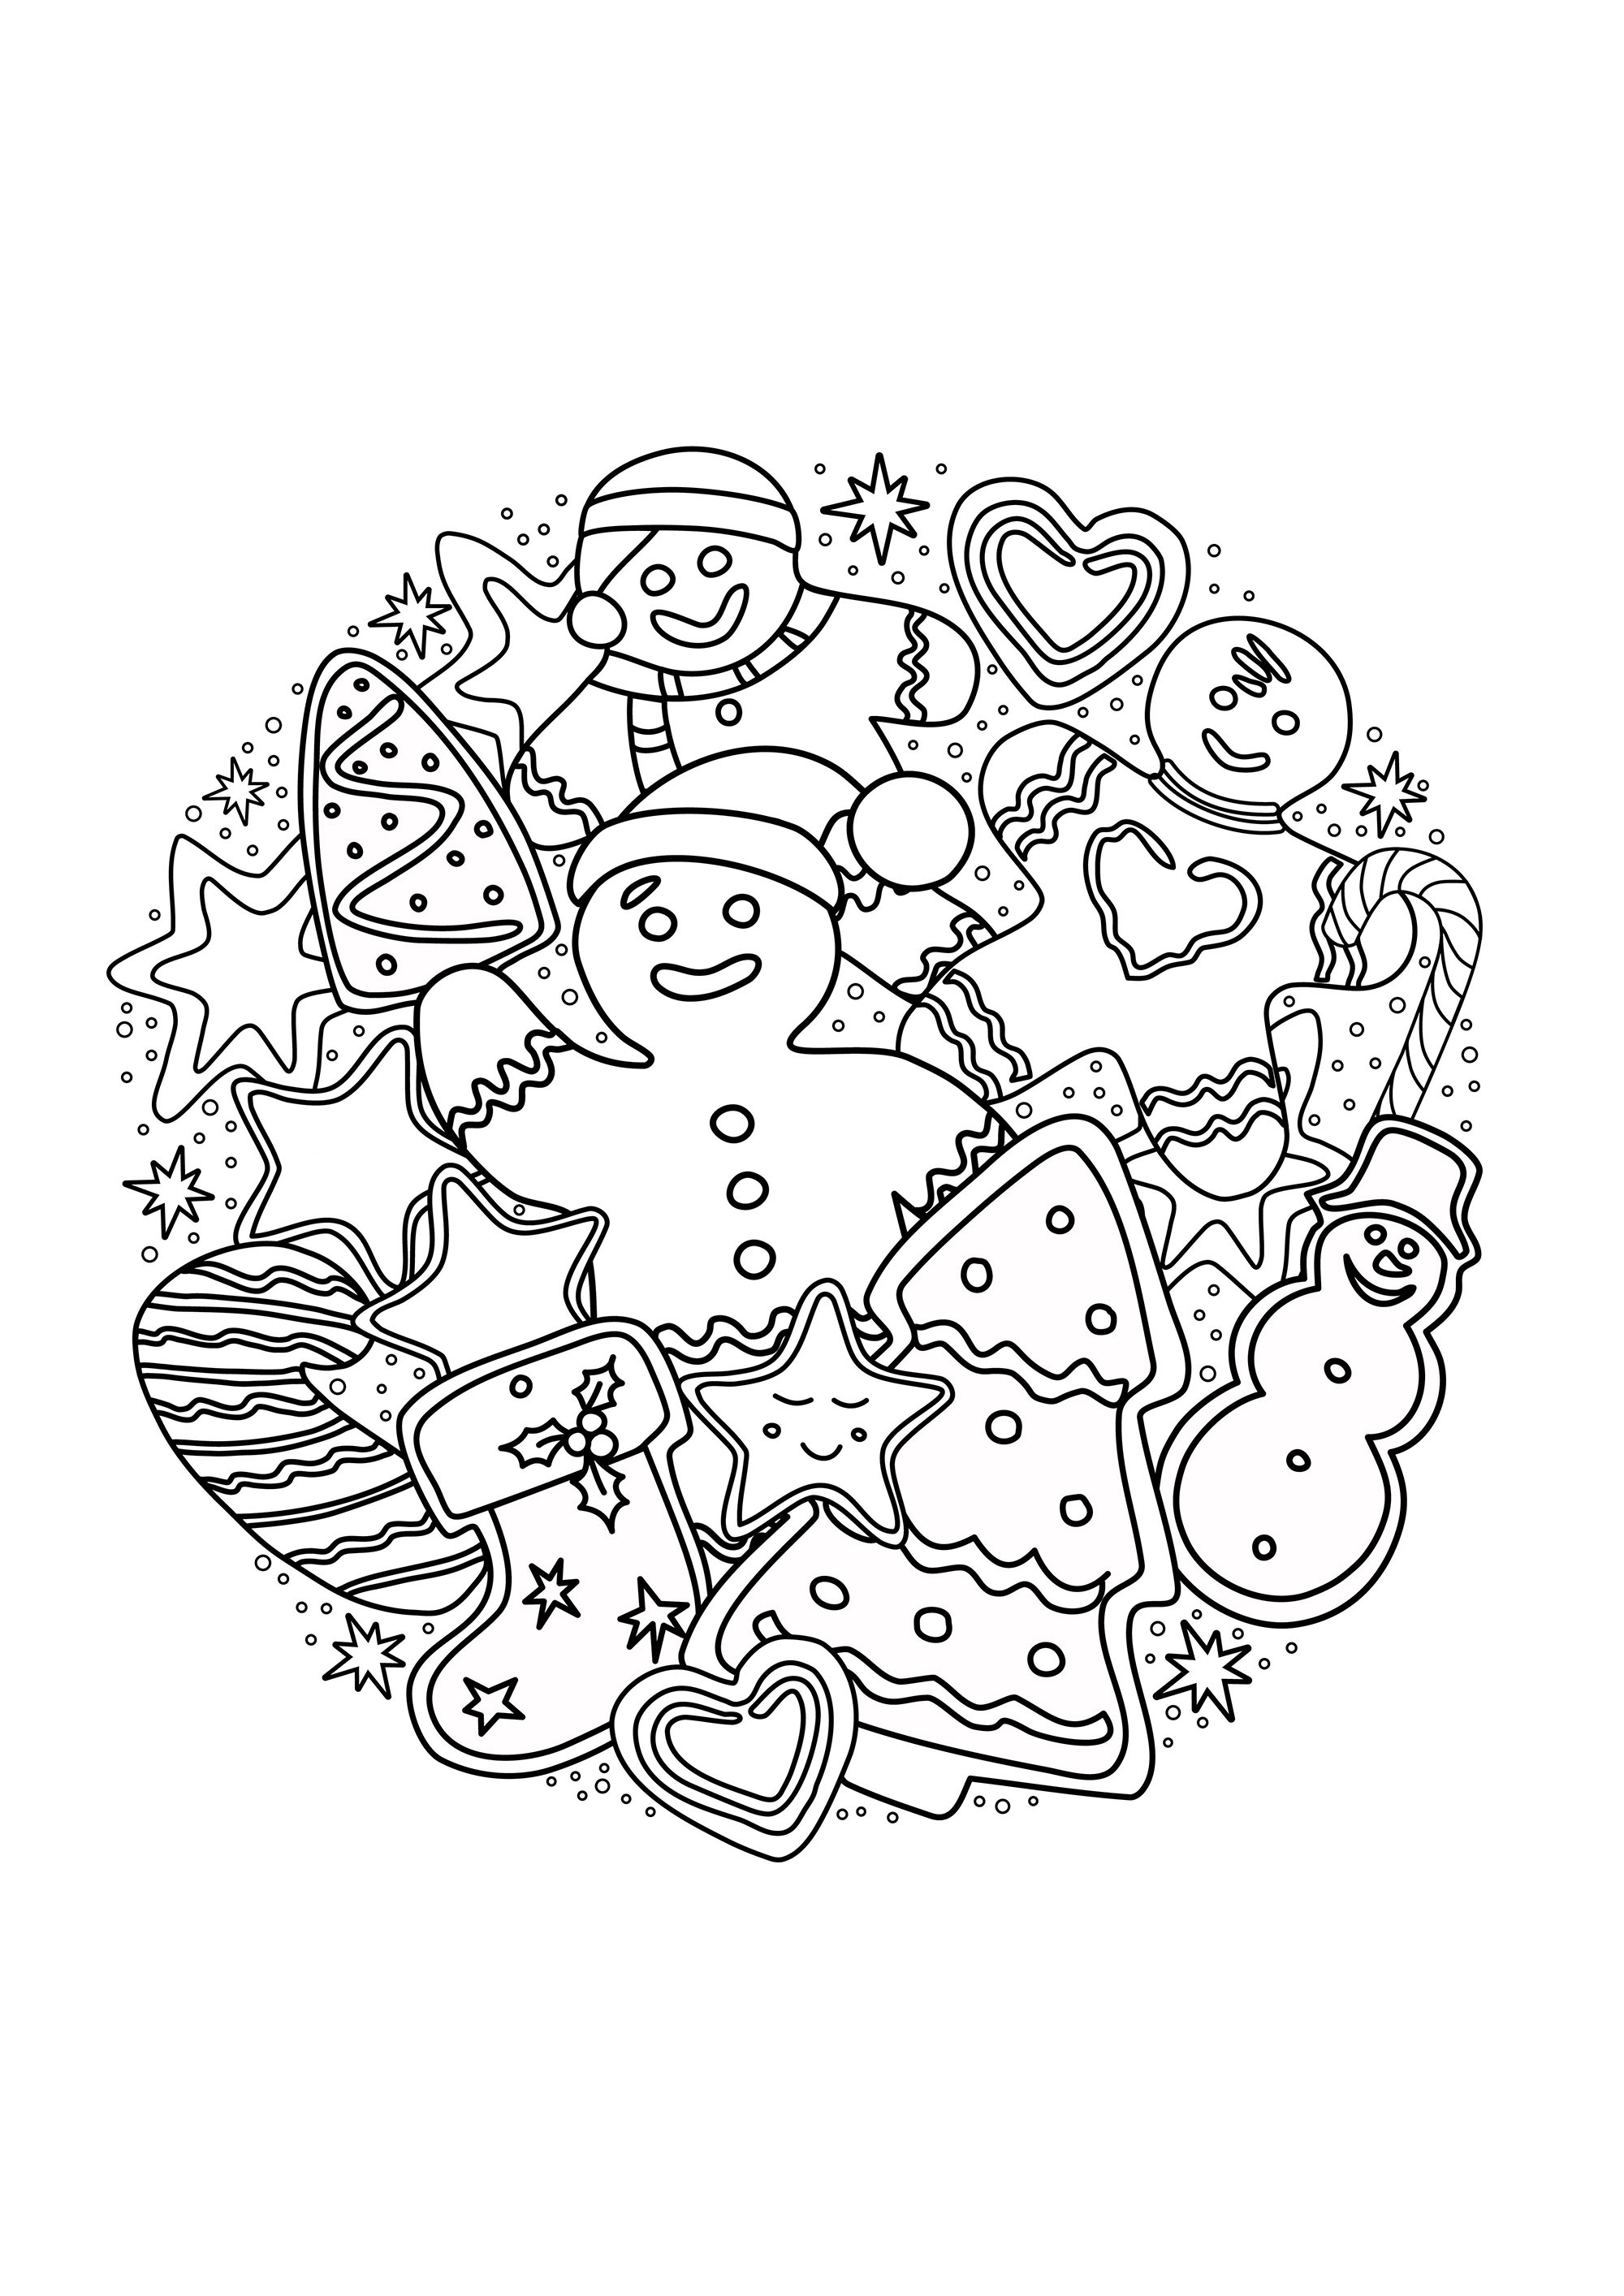 Gingerbread Christmas man and other Christmas subjects forming a nice mandala to color